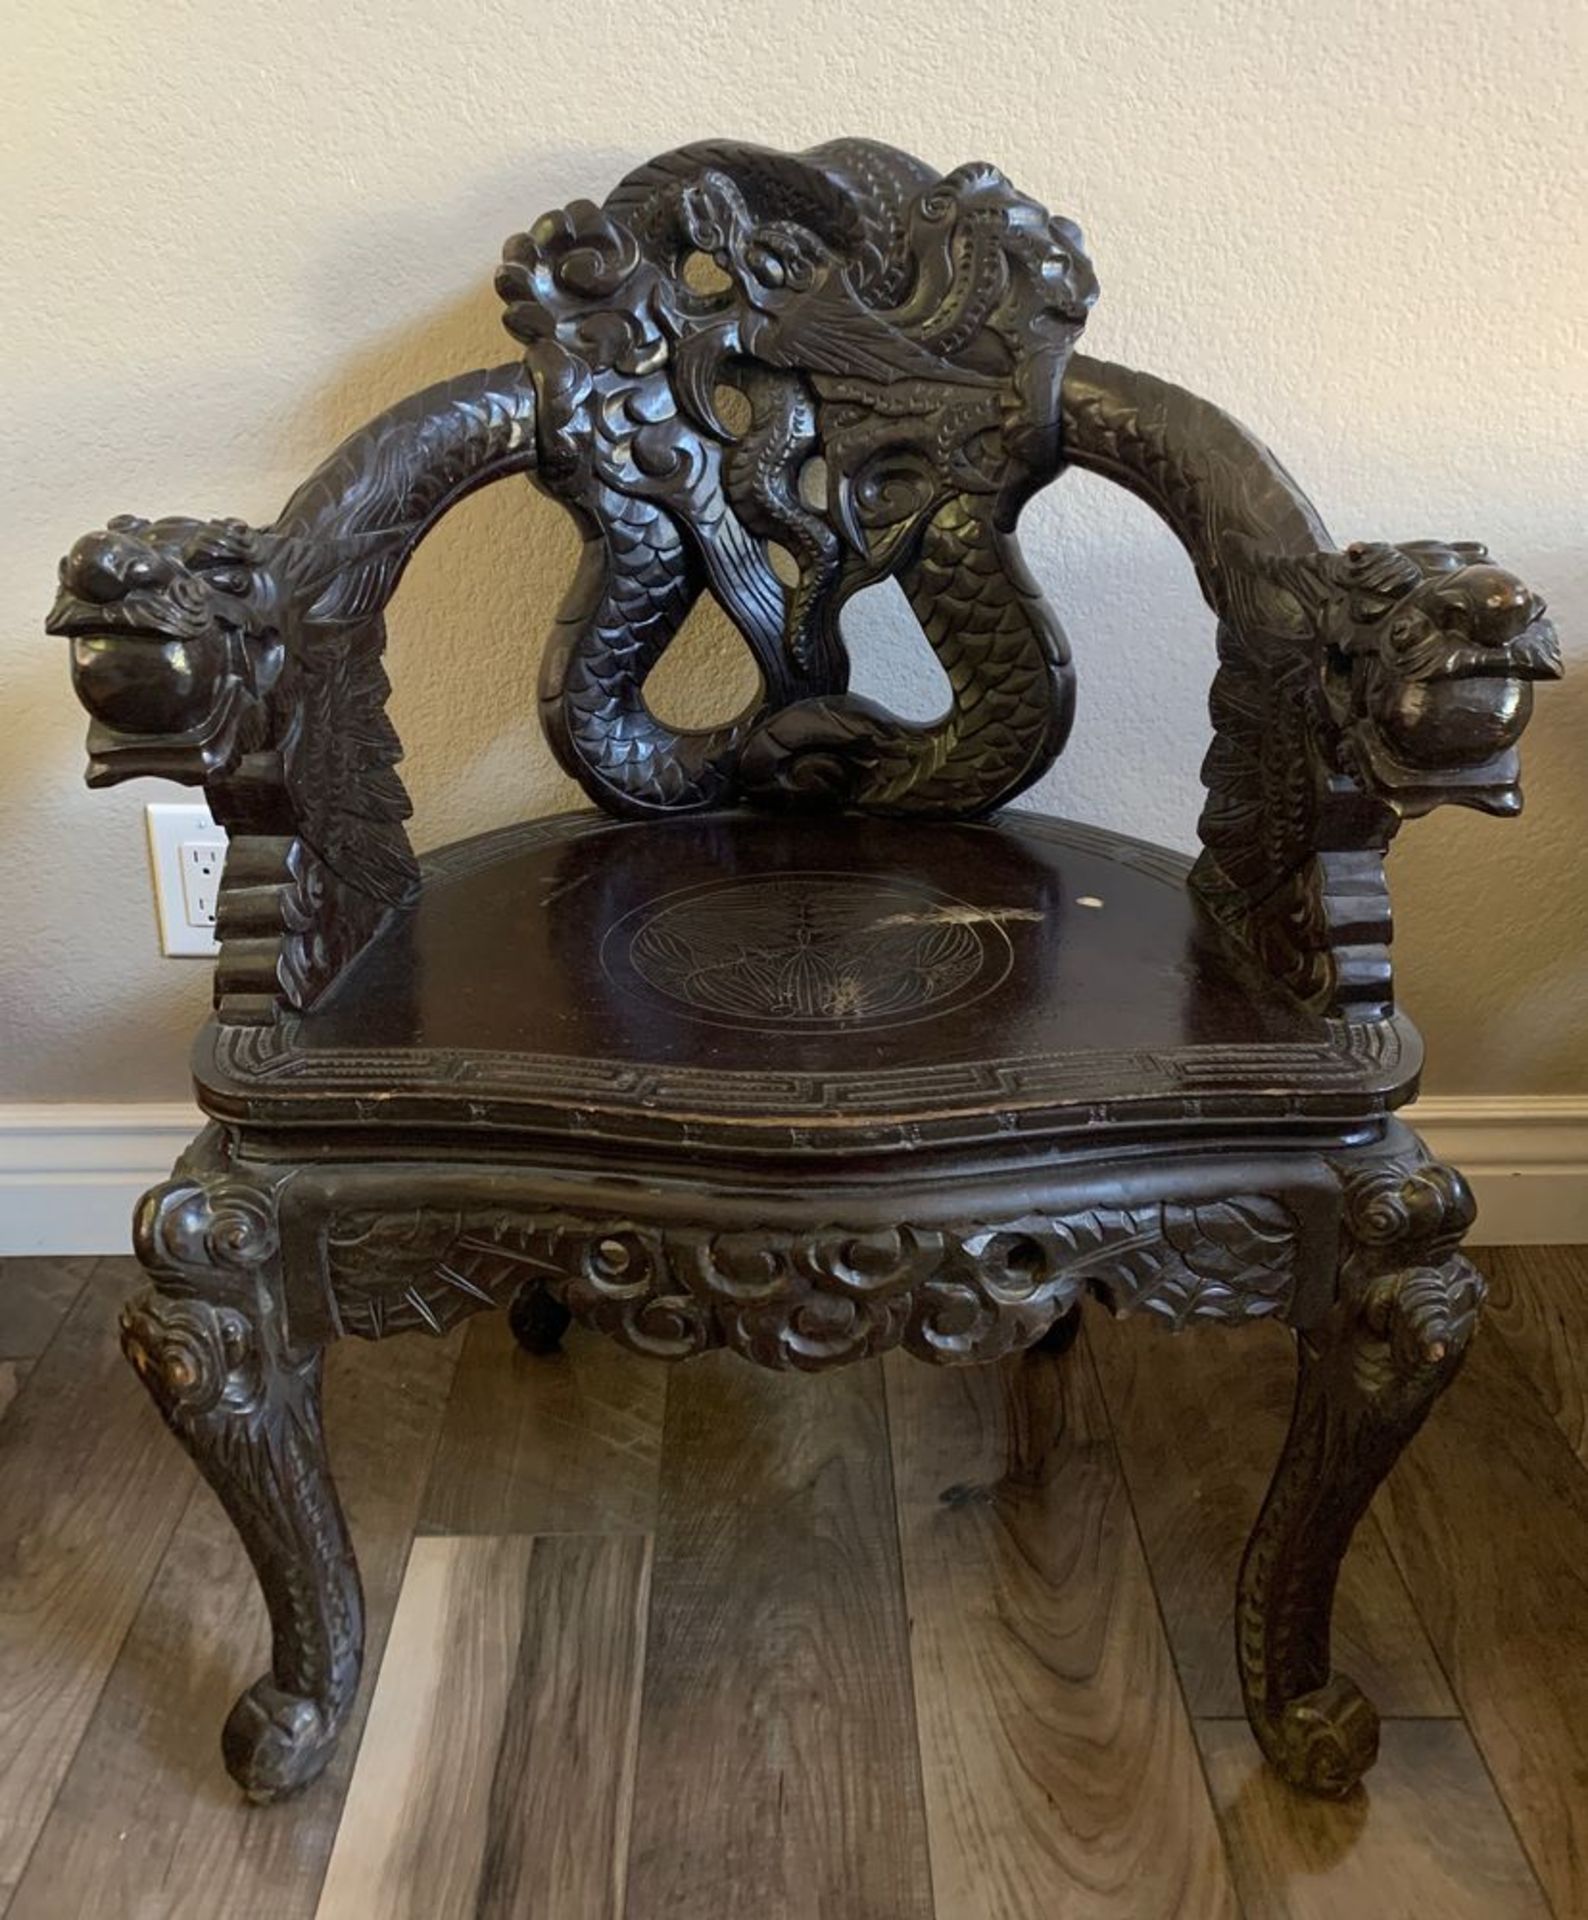 Antique Queen's Throne Chair, Hand Carved Wood, believed to be 150+ years old